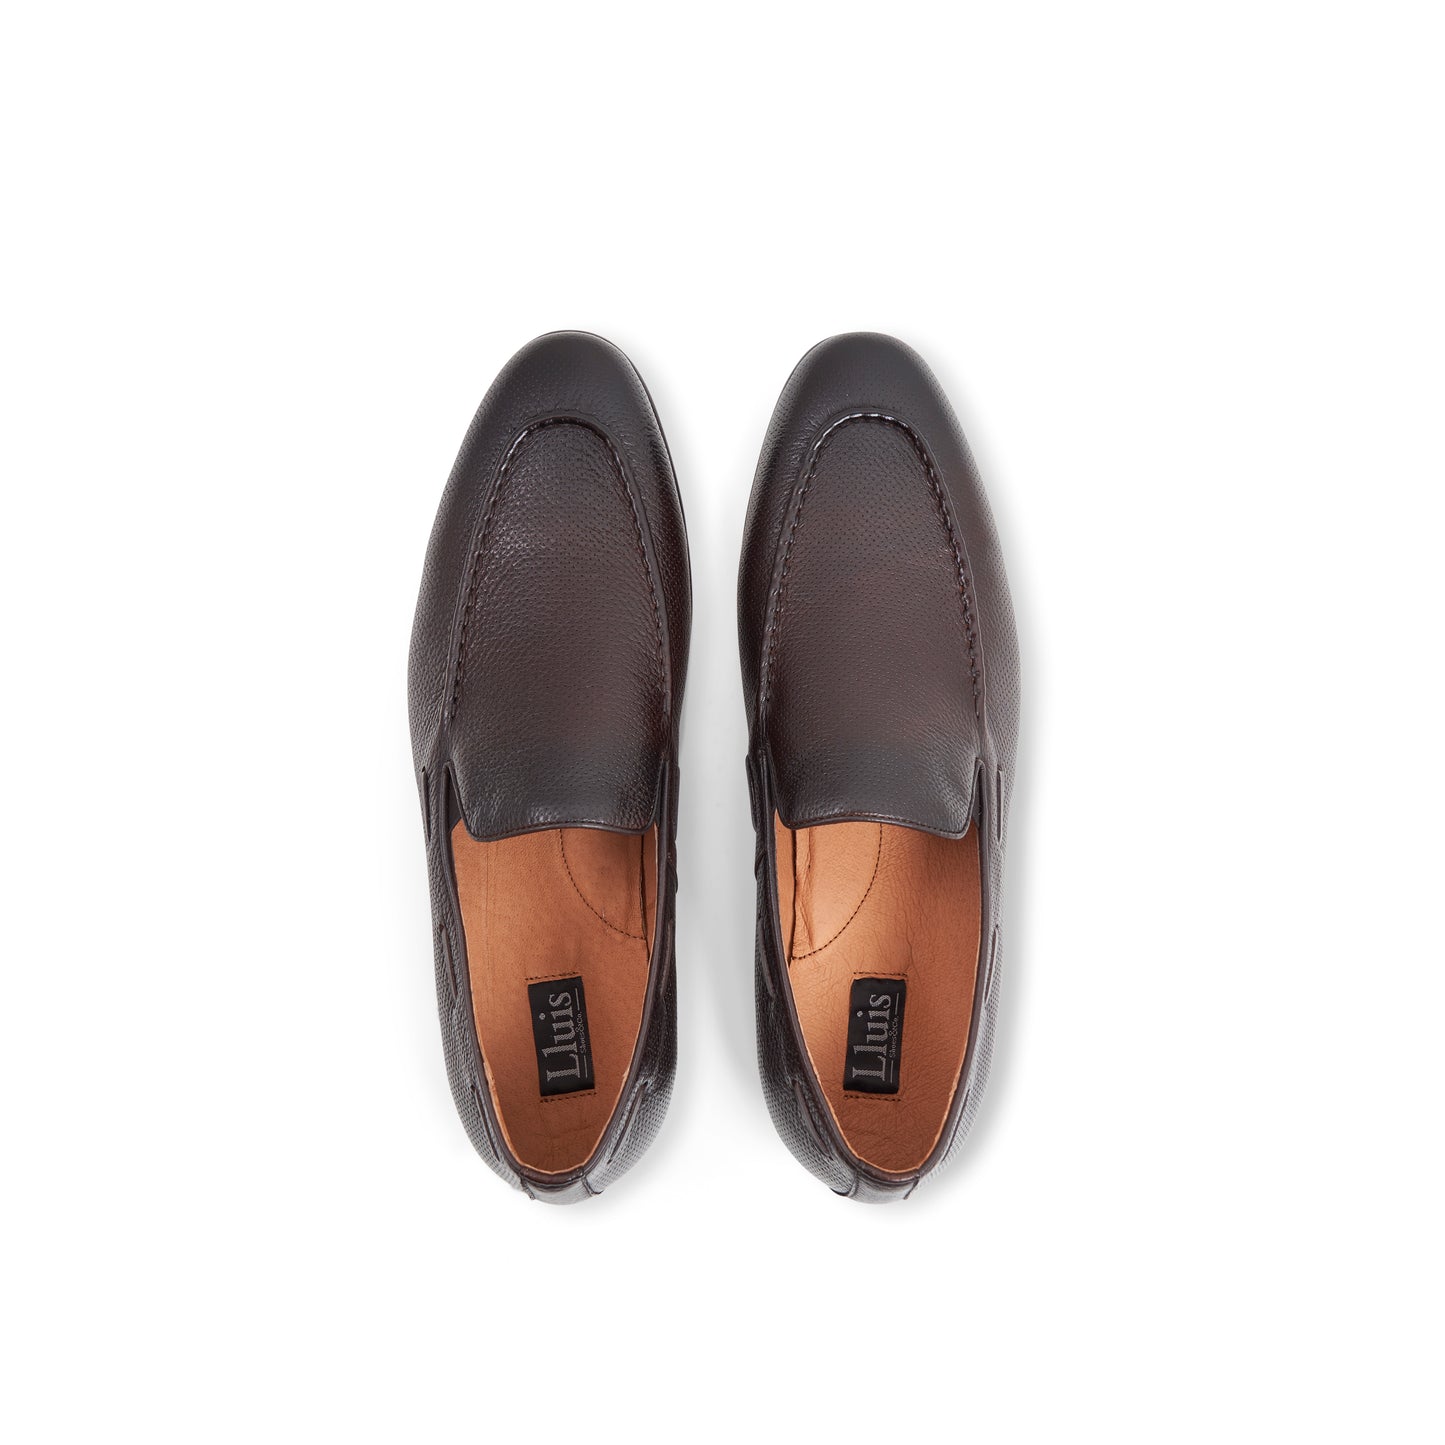 Top view of Milan Loafers in Coffee